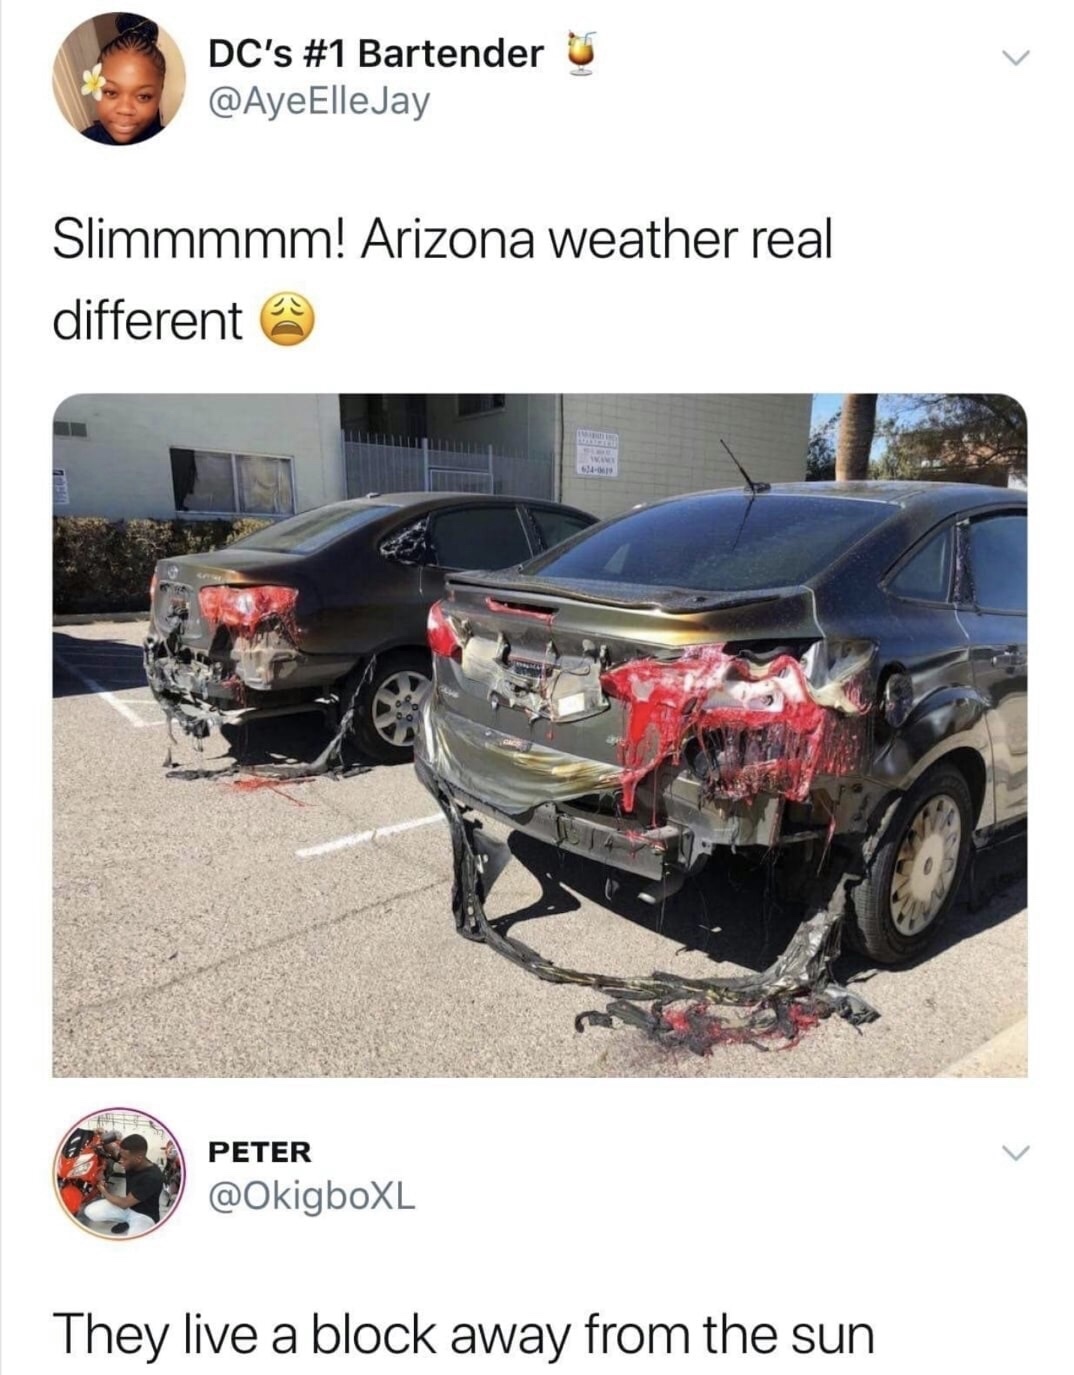 cars melting in kuwait - Dc's Bartender U Jay Slimmmmm! Arizona weather real different Peter They live a block away from the sun